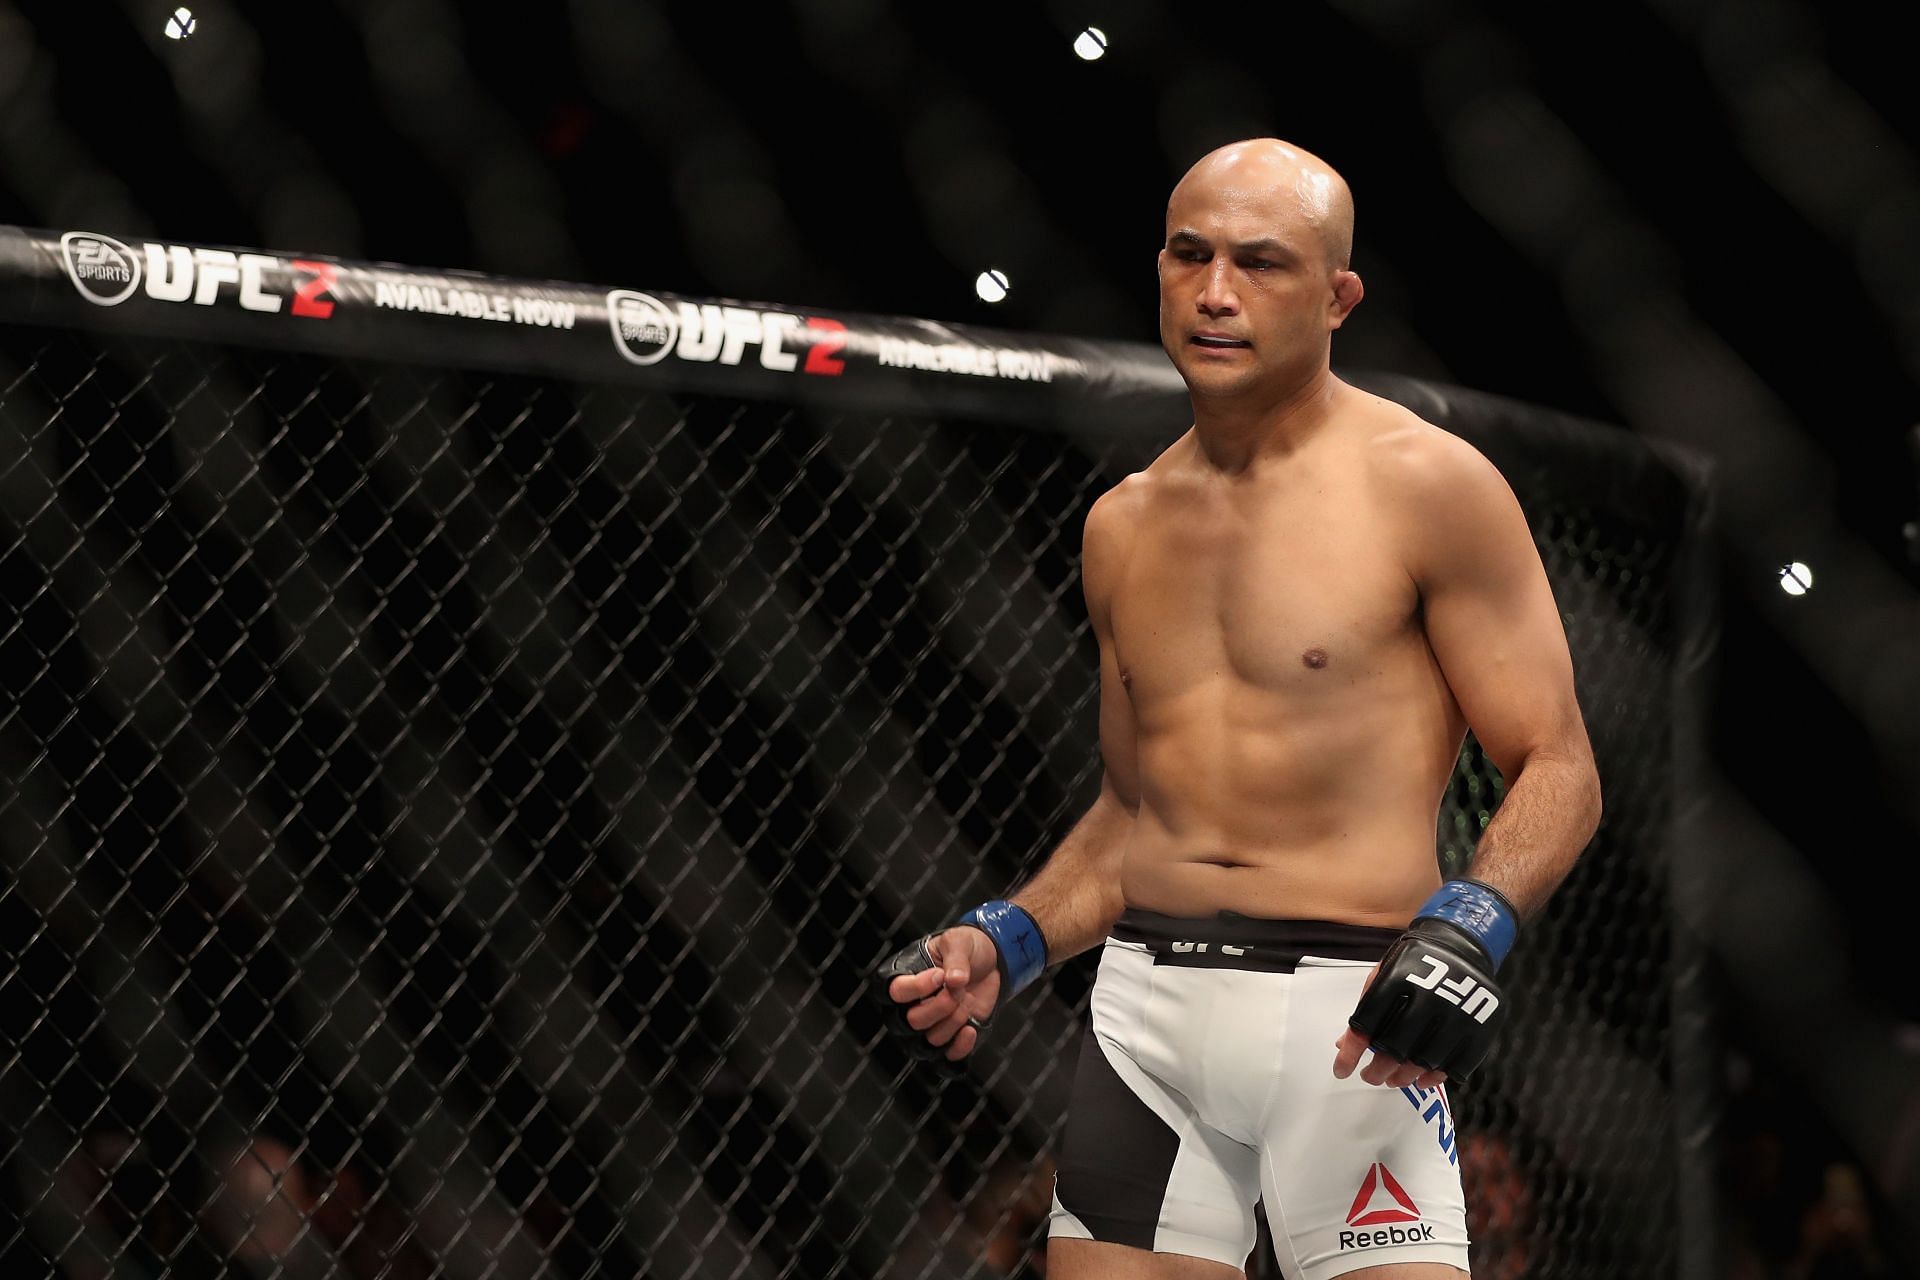 BJ Penn was the last example of an active champion who abandoned their title to move elsewhere